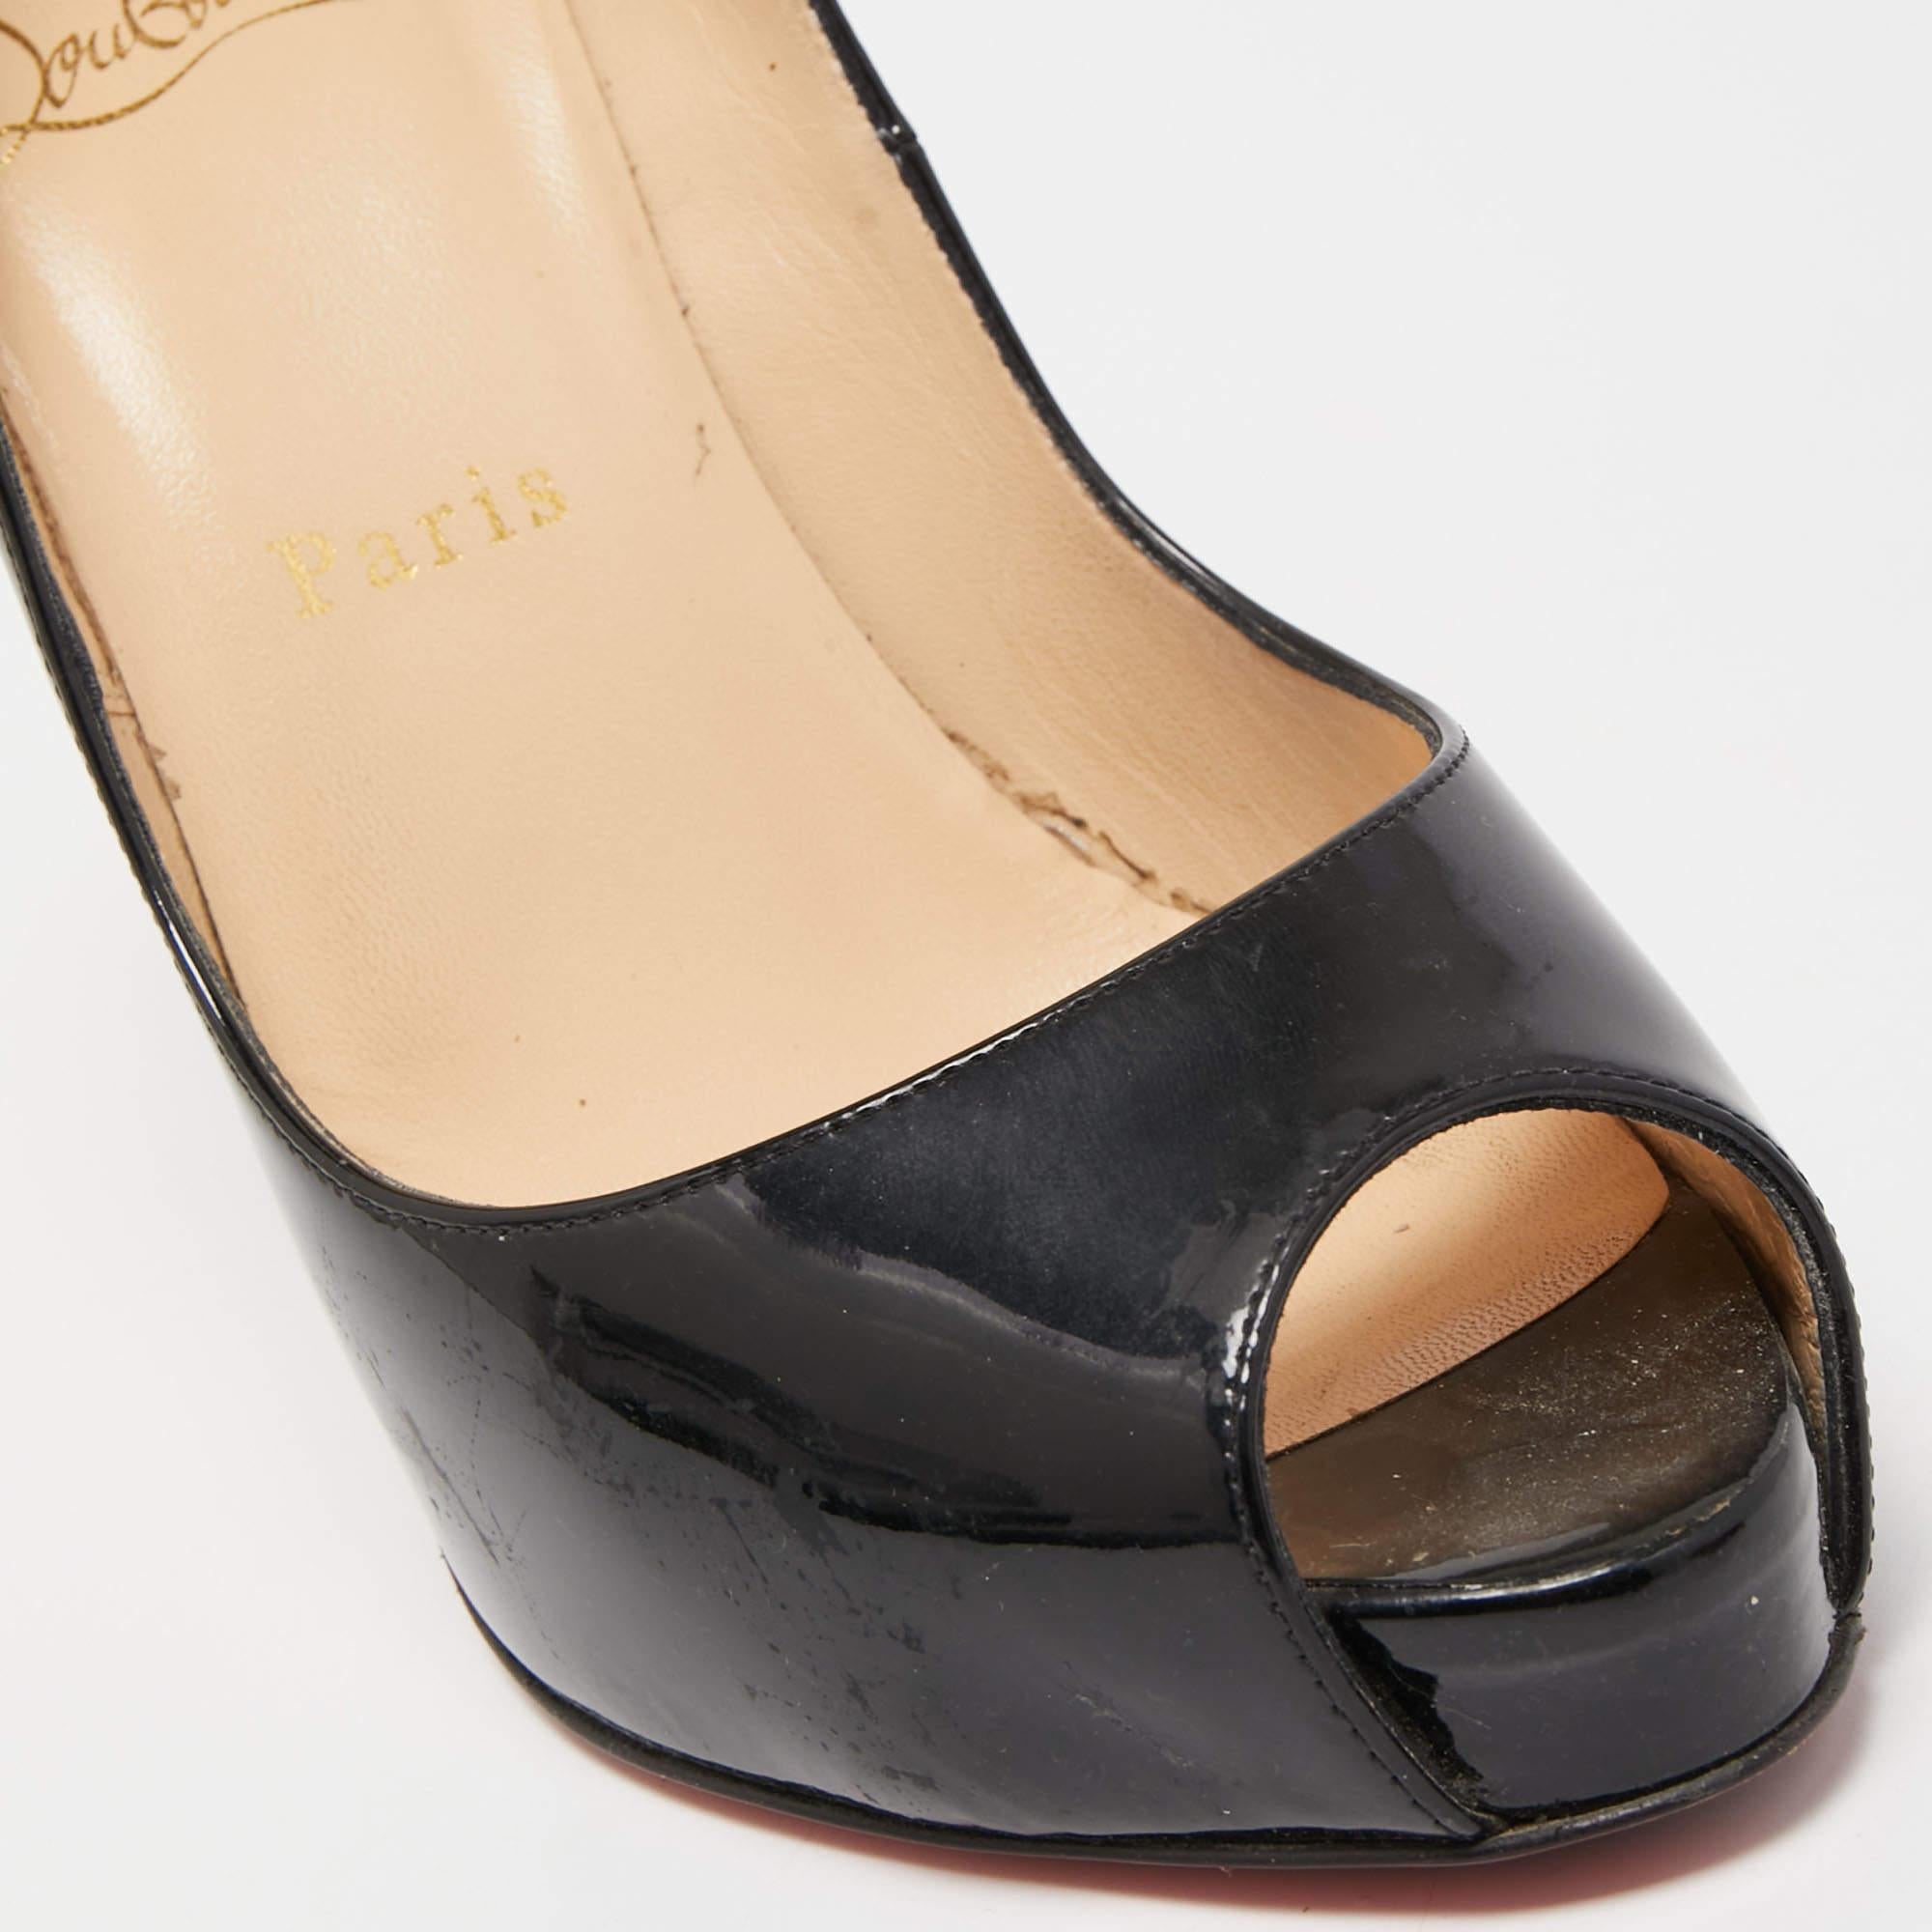 Christian Louboutin Black Patent Leather Very Prive Pumps Size 37 For Sale 3